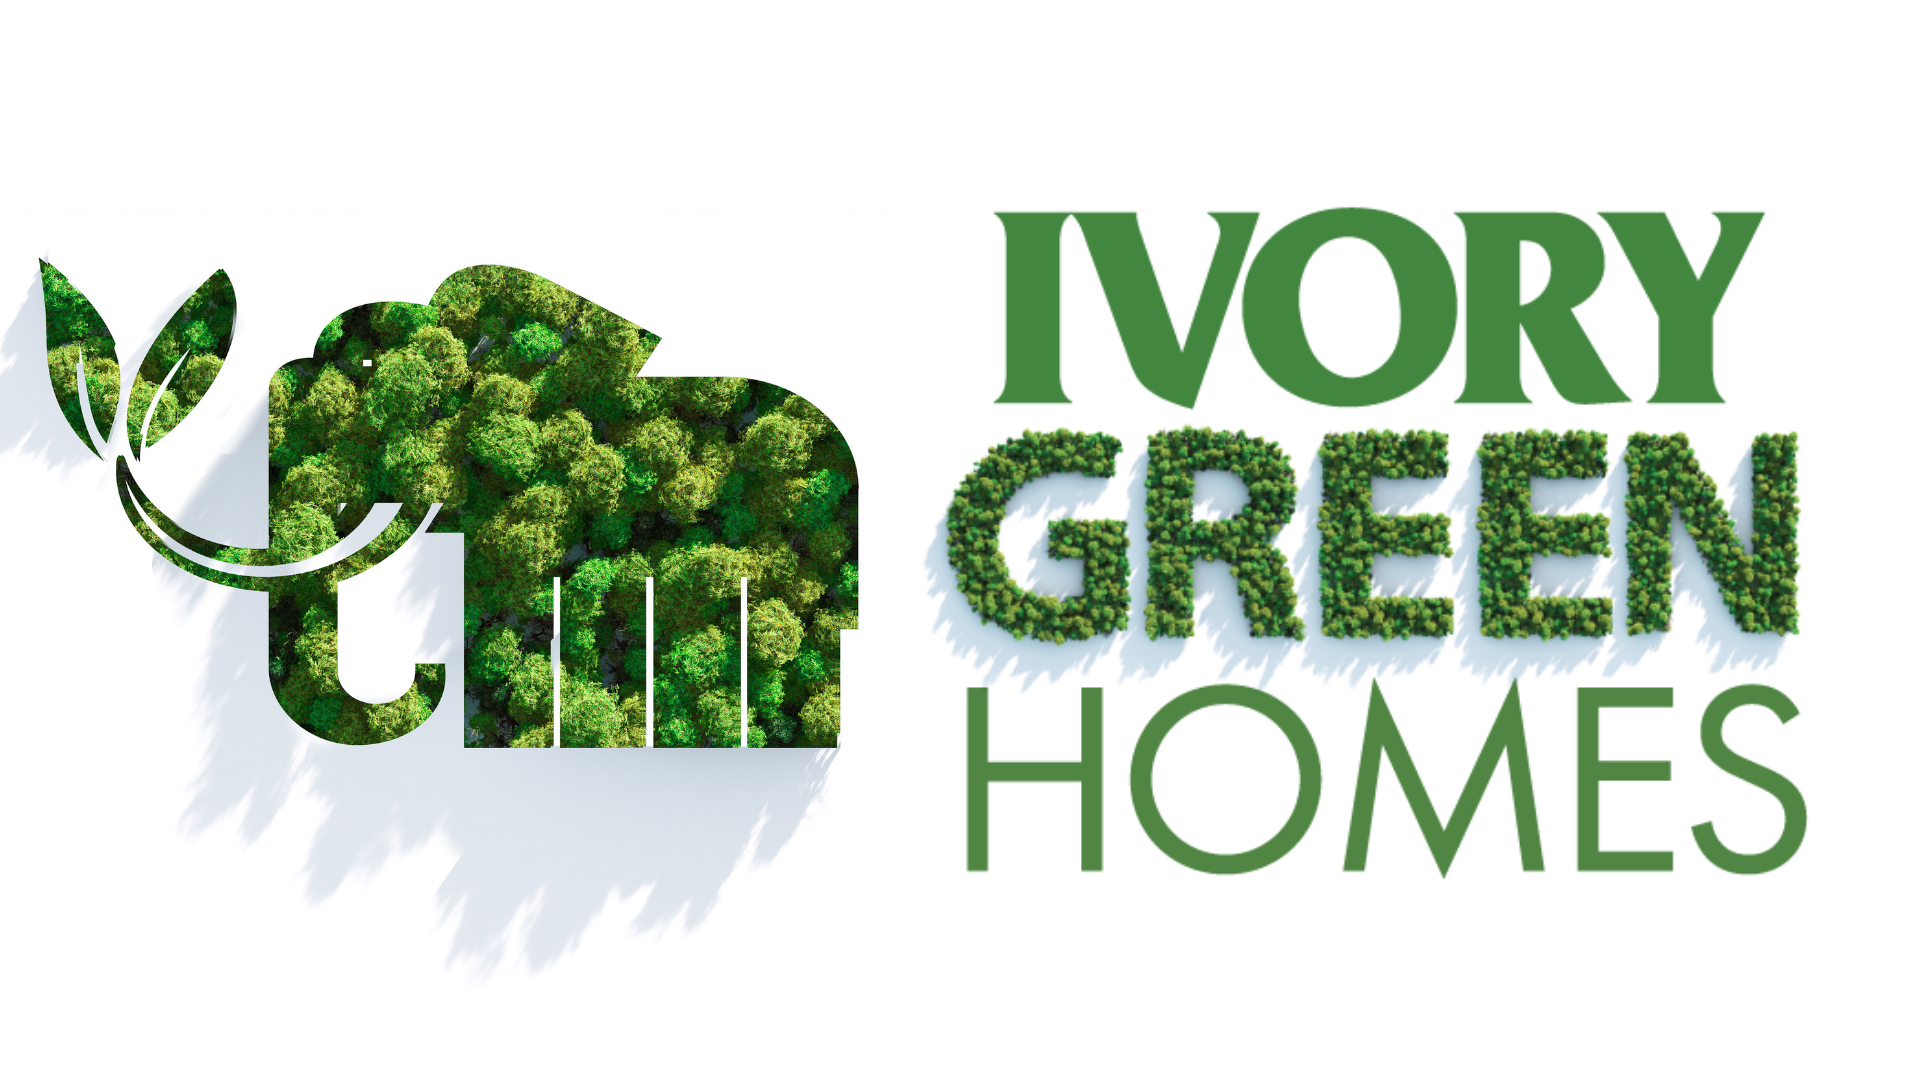 Ivory Homes Saves Homebuyers Money and the Environment